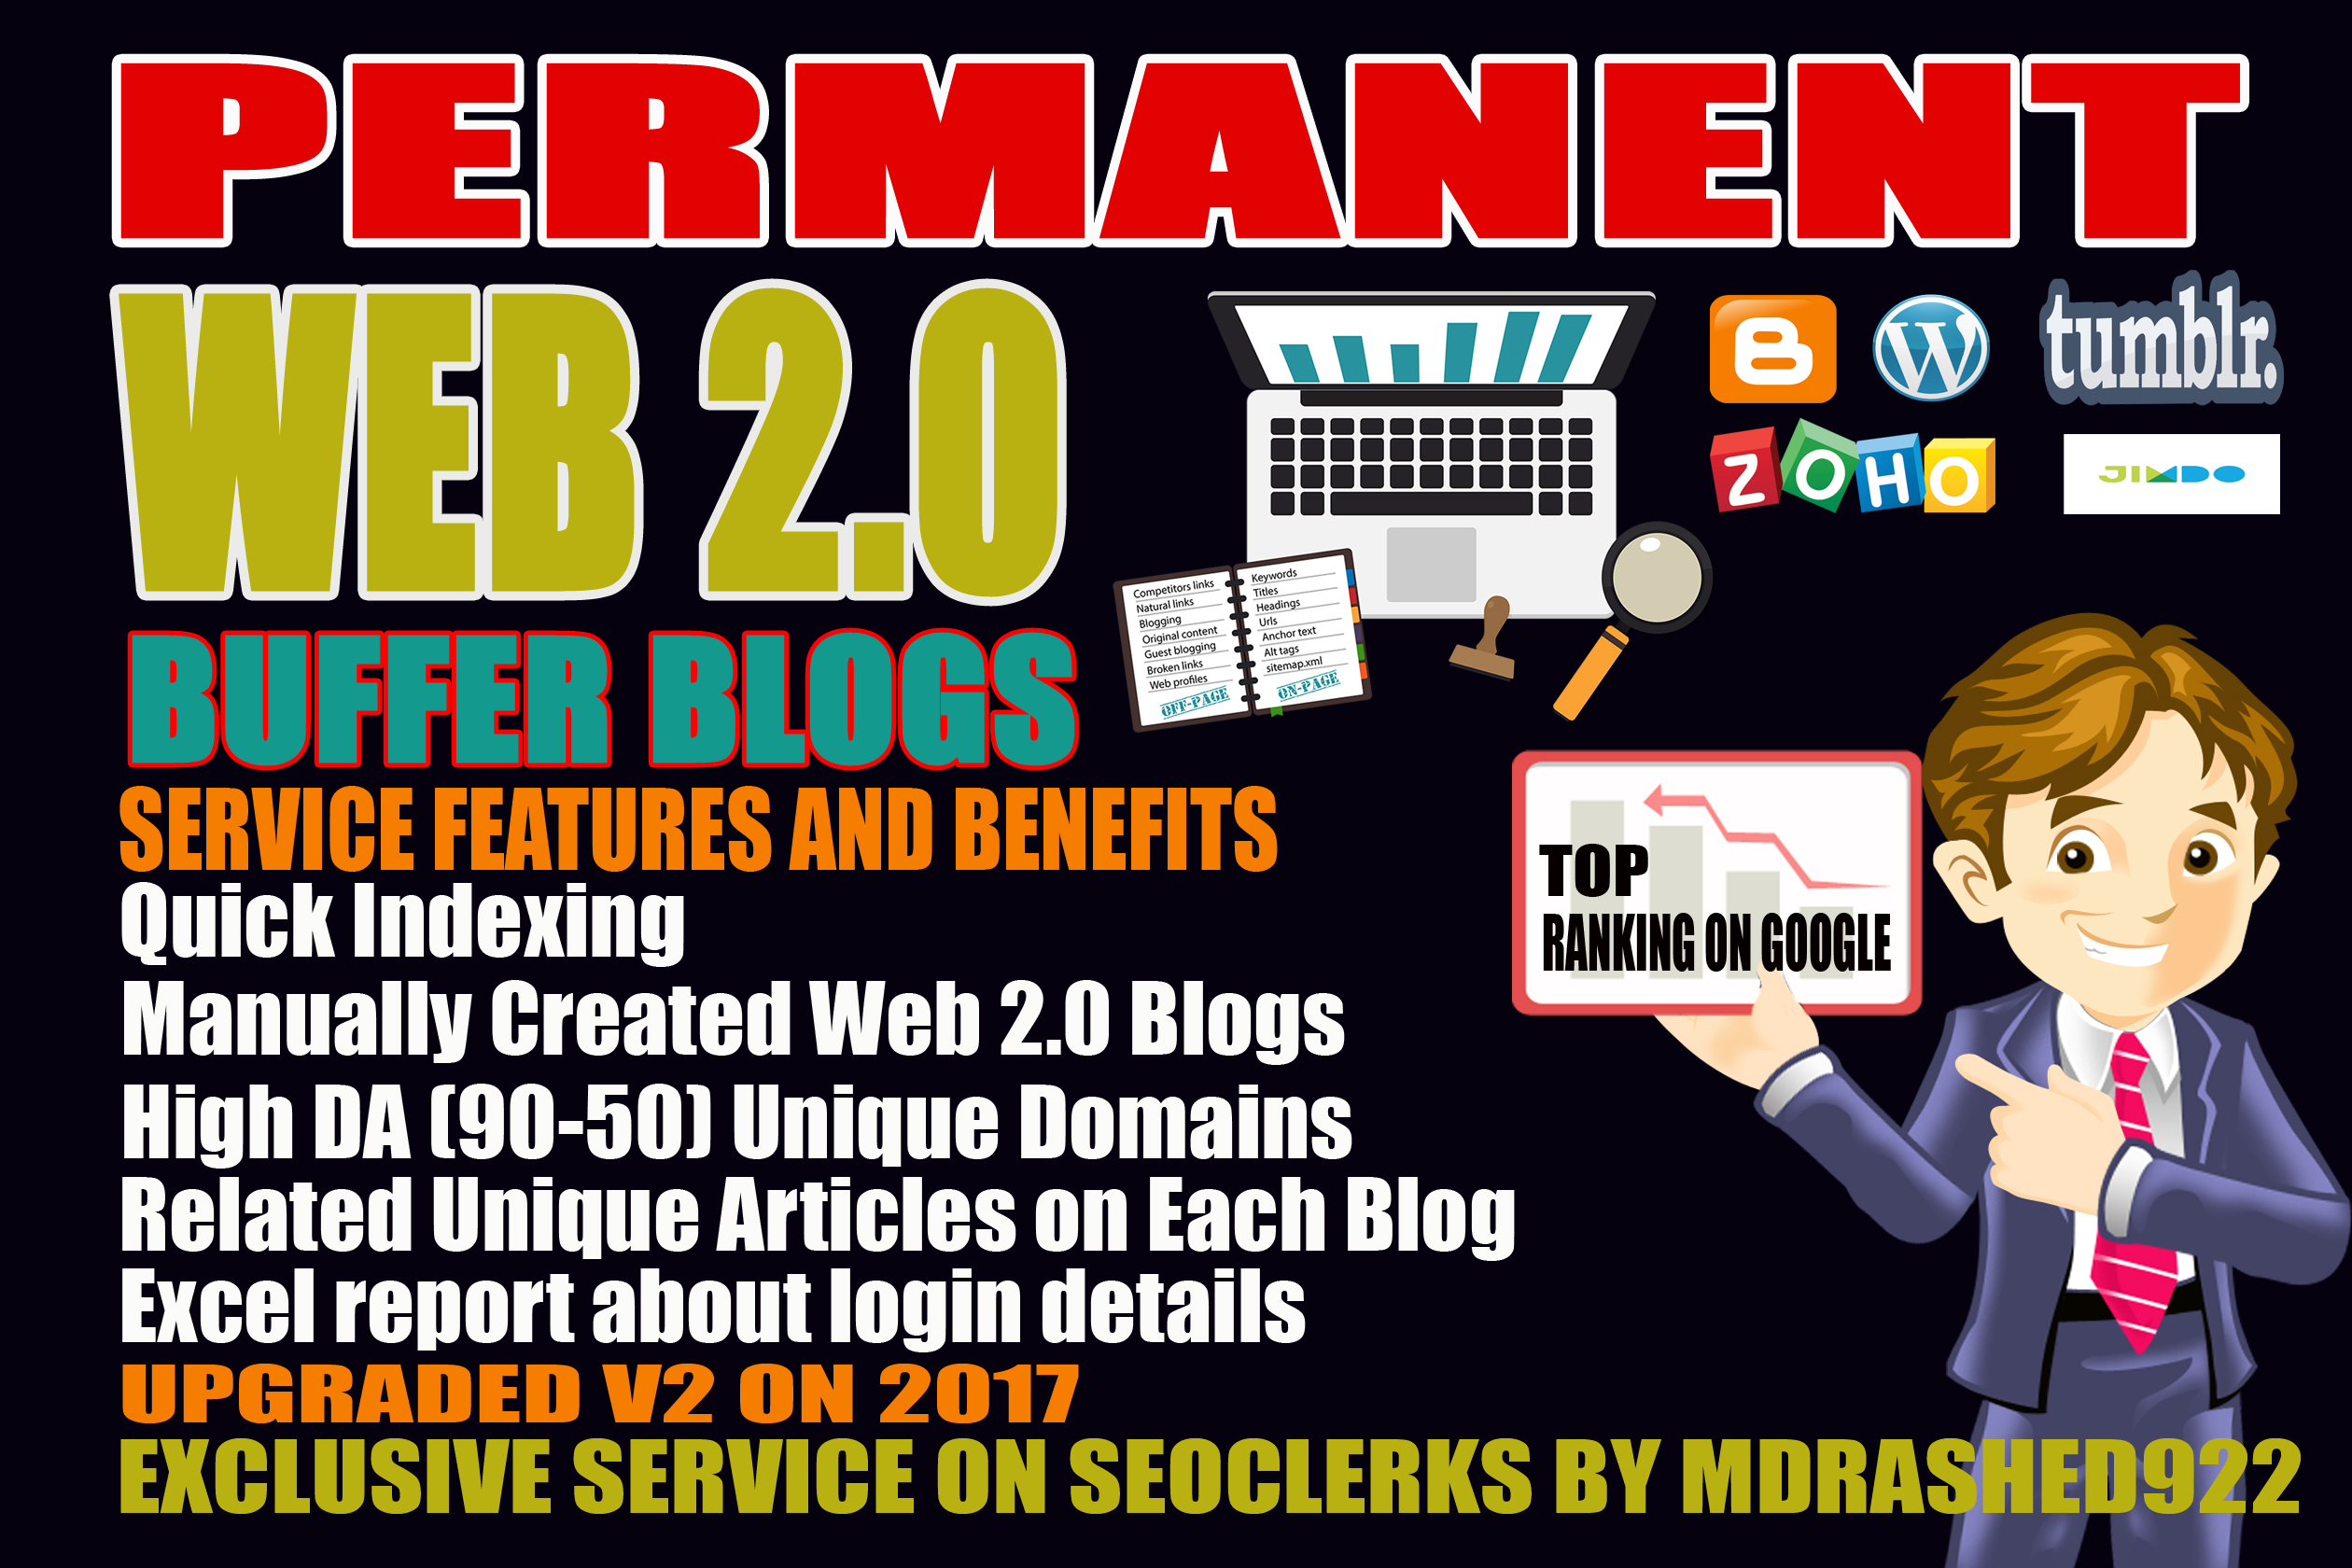 Handmade 15 Web 2.0 Buffer Blogs with login,unique Content, Image, Video and High DA Backlinks